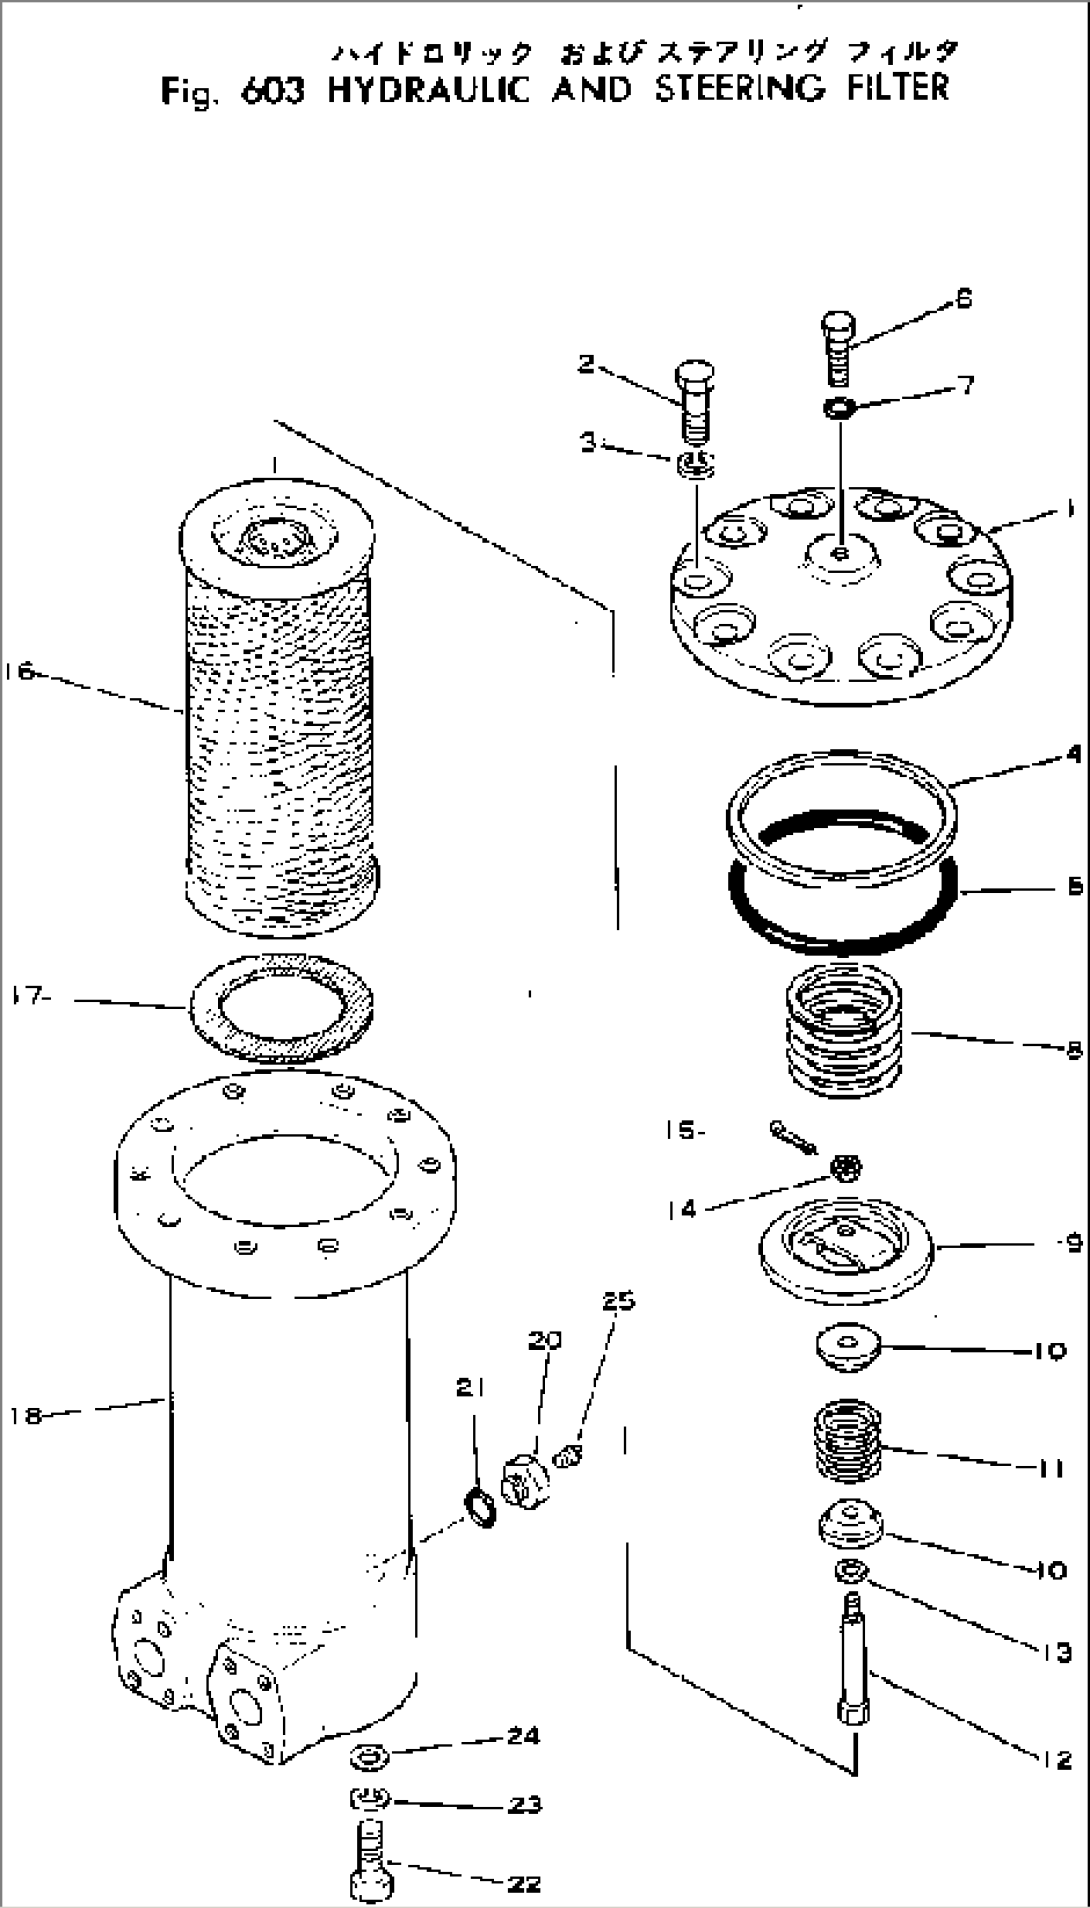 HYDRAULIC AND STEERING FILTER